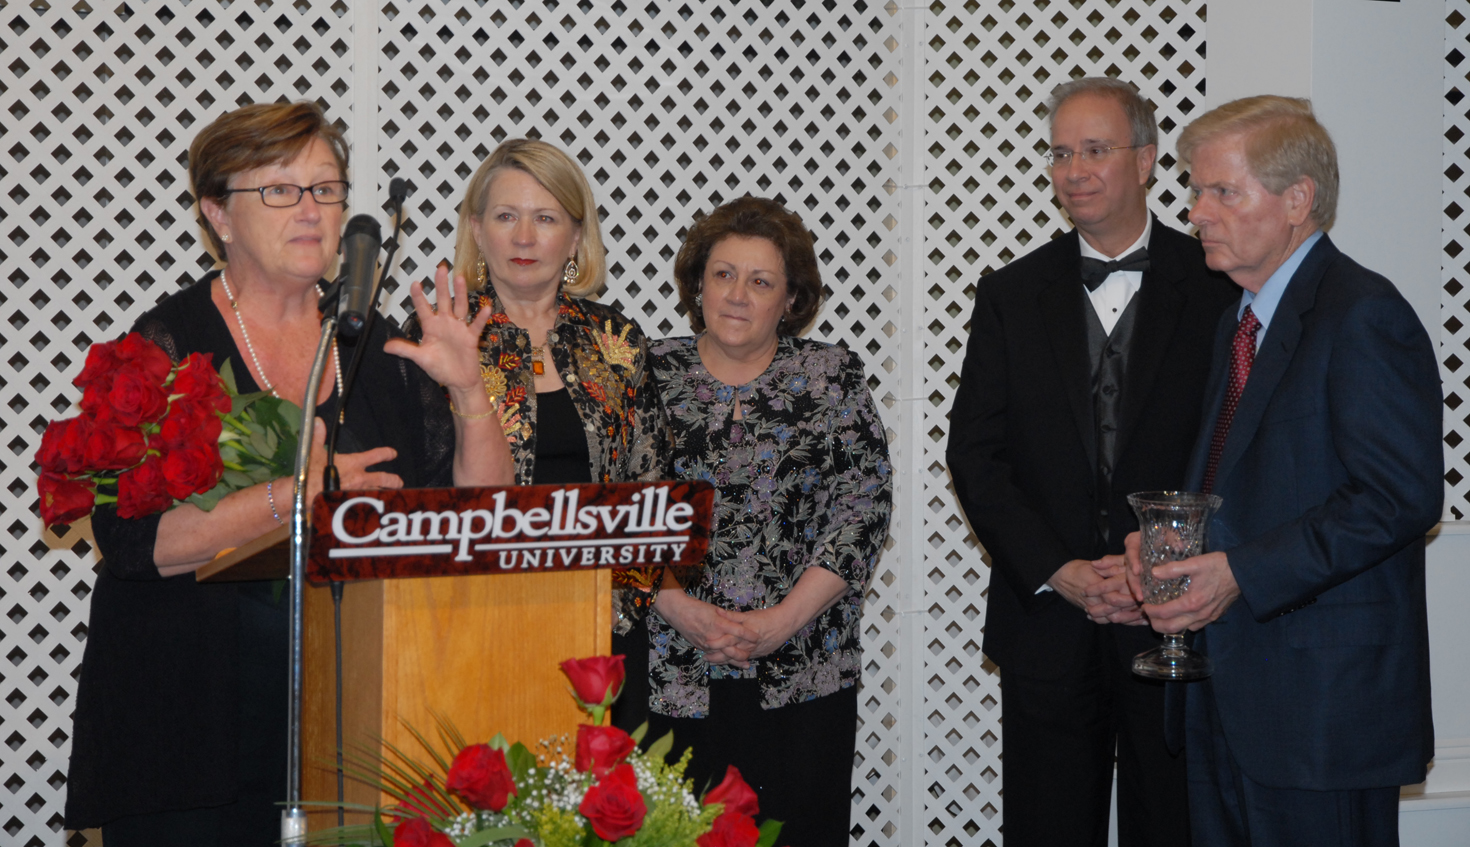 Betty Porter of Mt. Washington, Ky. thanks the Campbellsville University Advancement Board for the presentation of the Derby Rose Gala Award to her and her husband, Dr. J. Chester Porter, far right. Gwinn Hahn, second from left, is chair of the Derby Rose Gala and Sara Curry, beside her, is chair of the Advancement Board. Campbellsville University president Michael V. Carter is beside Porter. (Campbellsville University Photo by Joan C. McKinney)